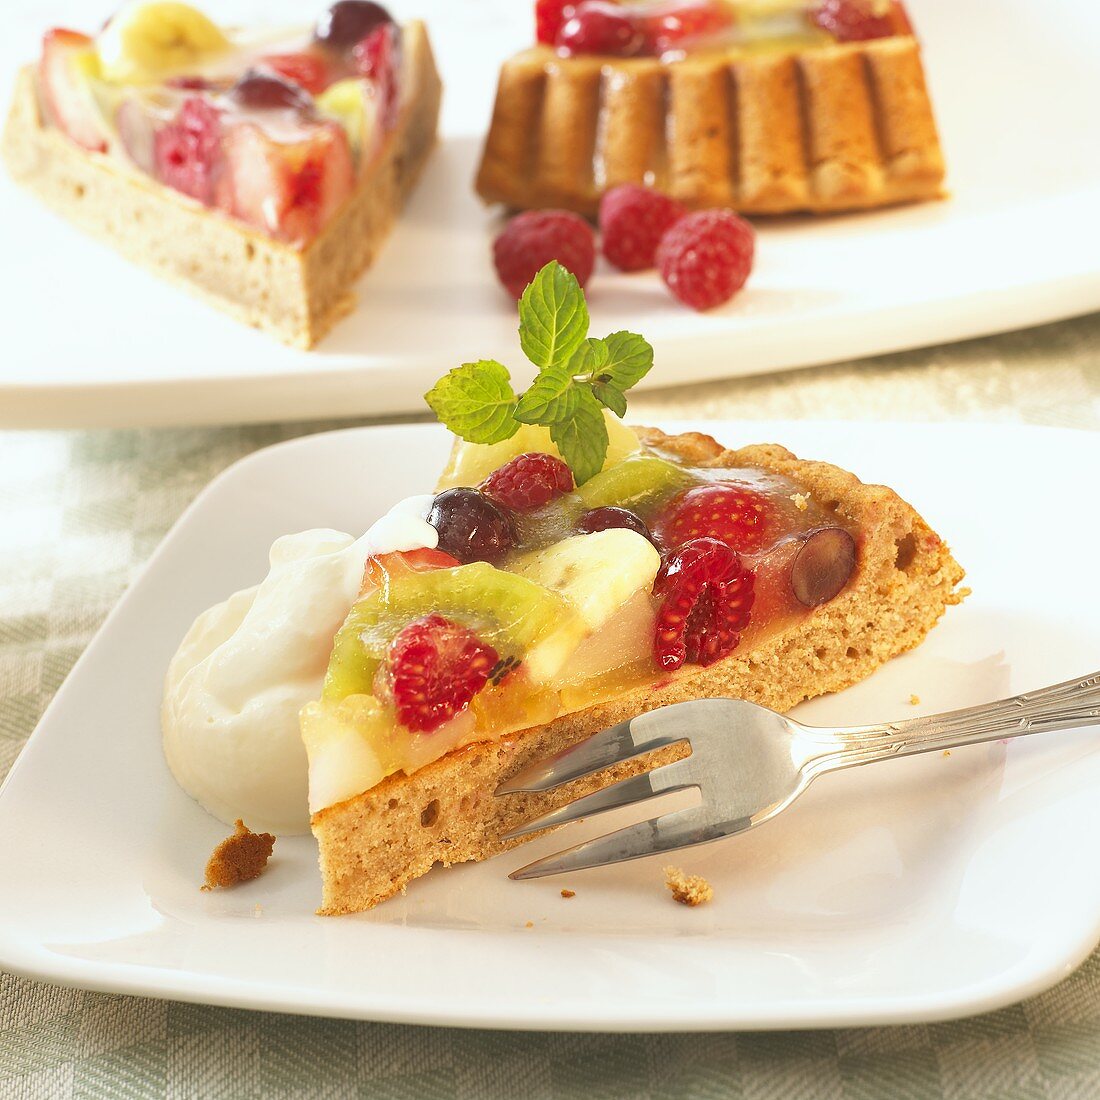 Three pieces of fruit flan with cream